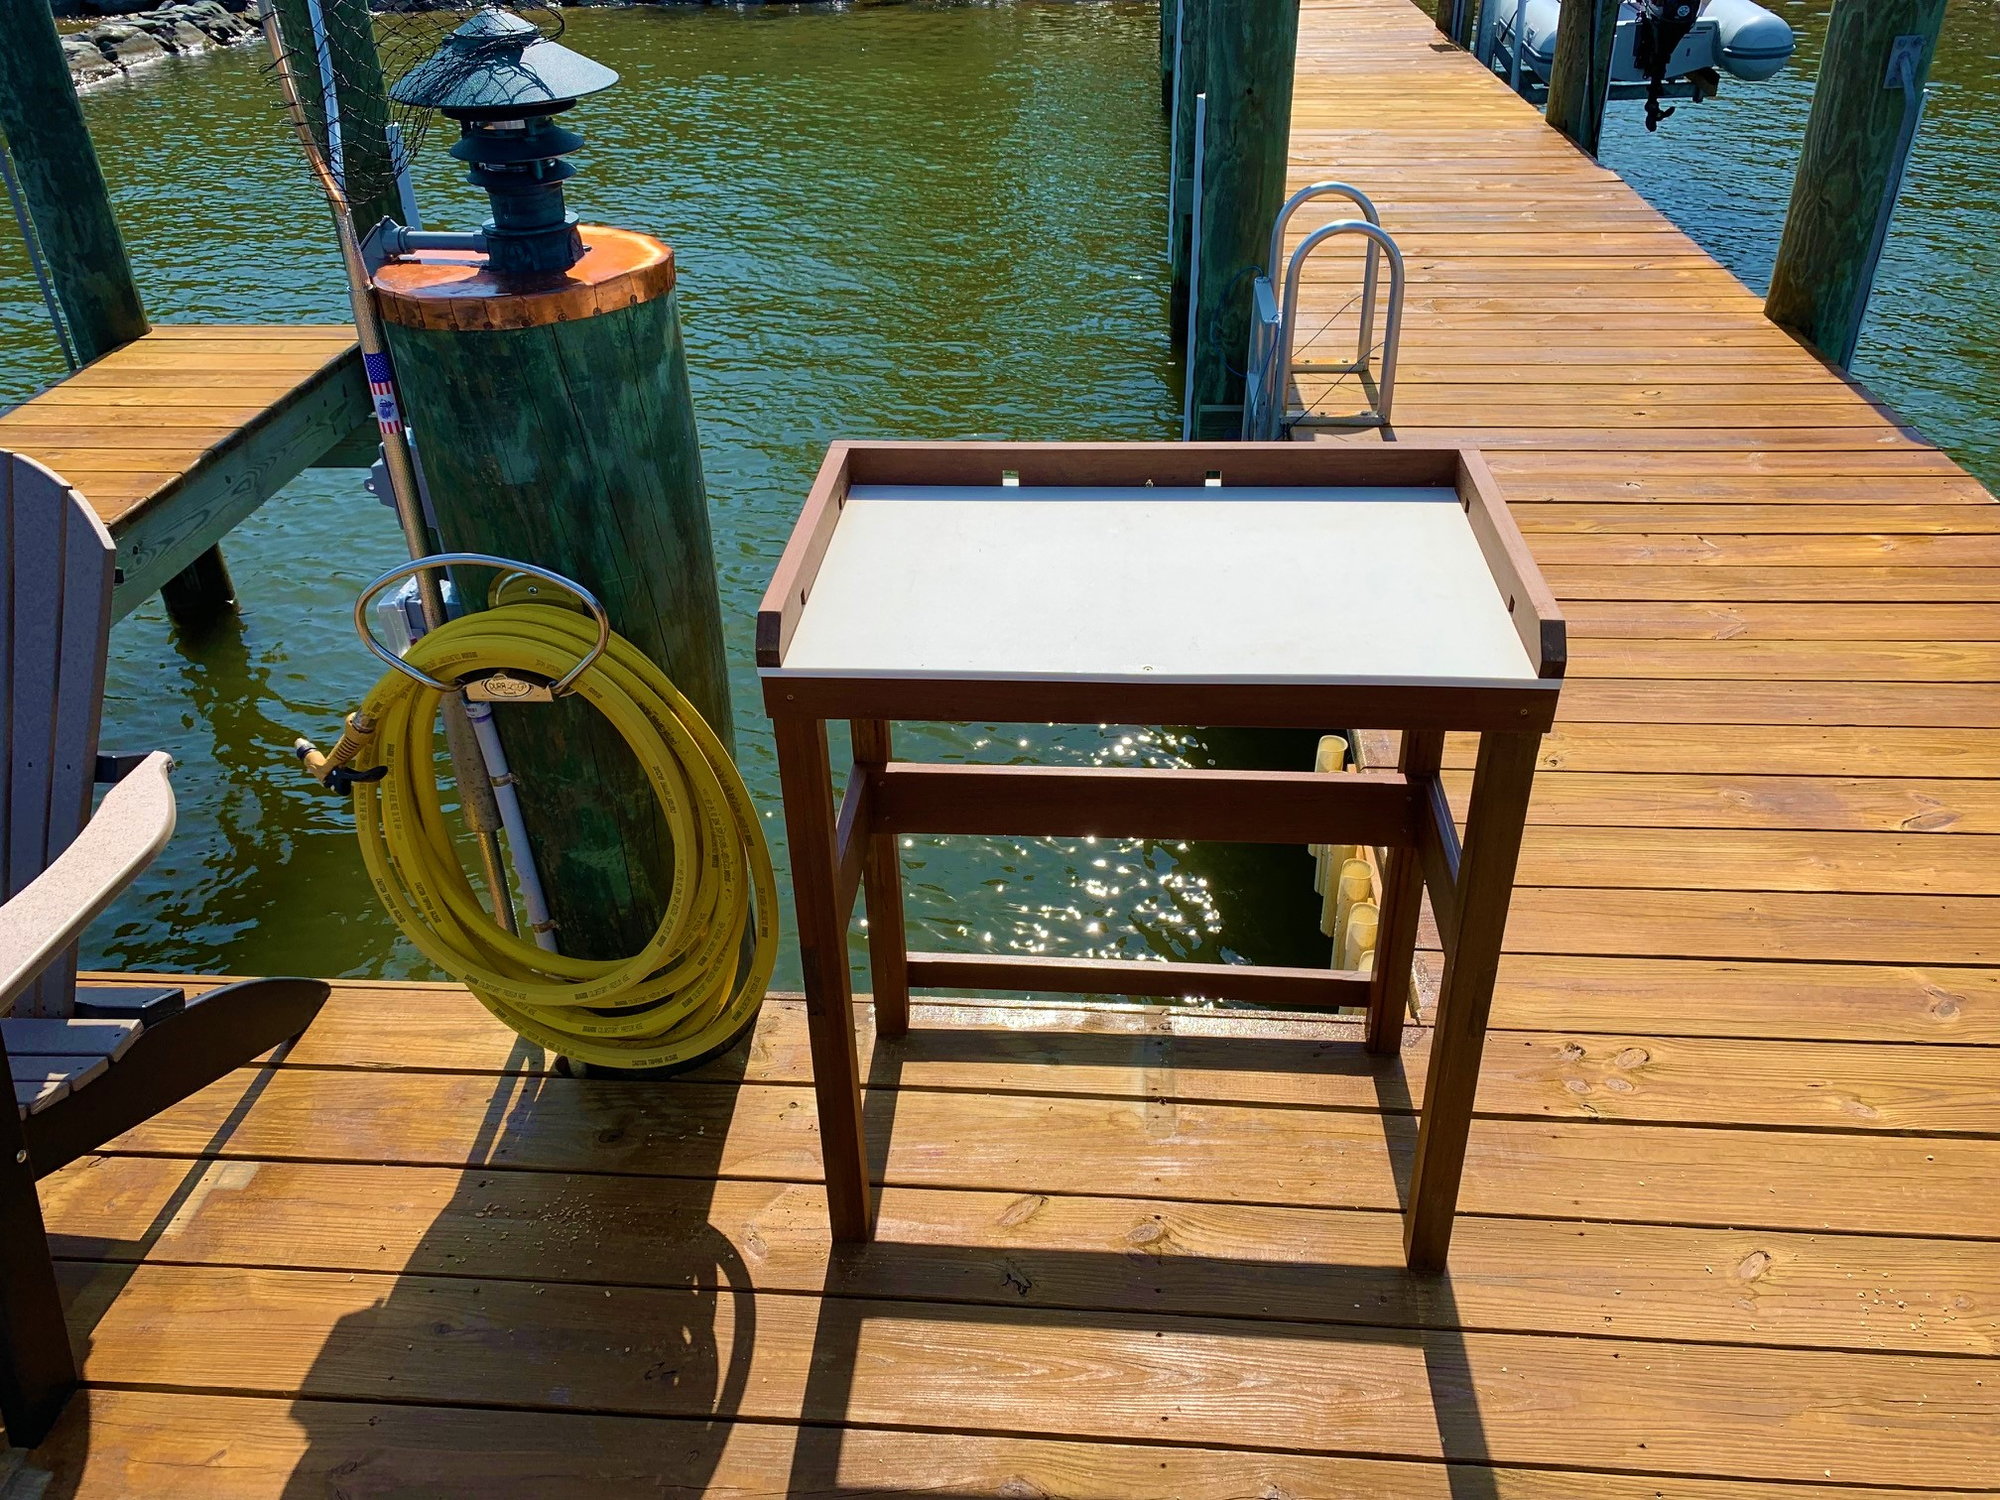 Homemade Fish Table For Dock - The Hull Truth - Boating and Fishing Forum